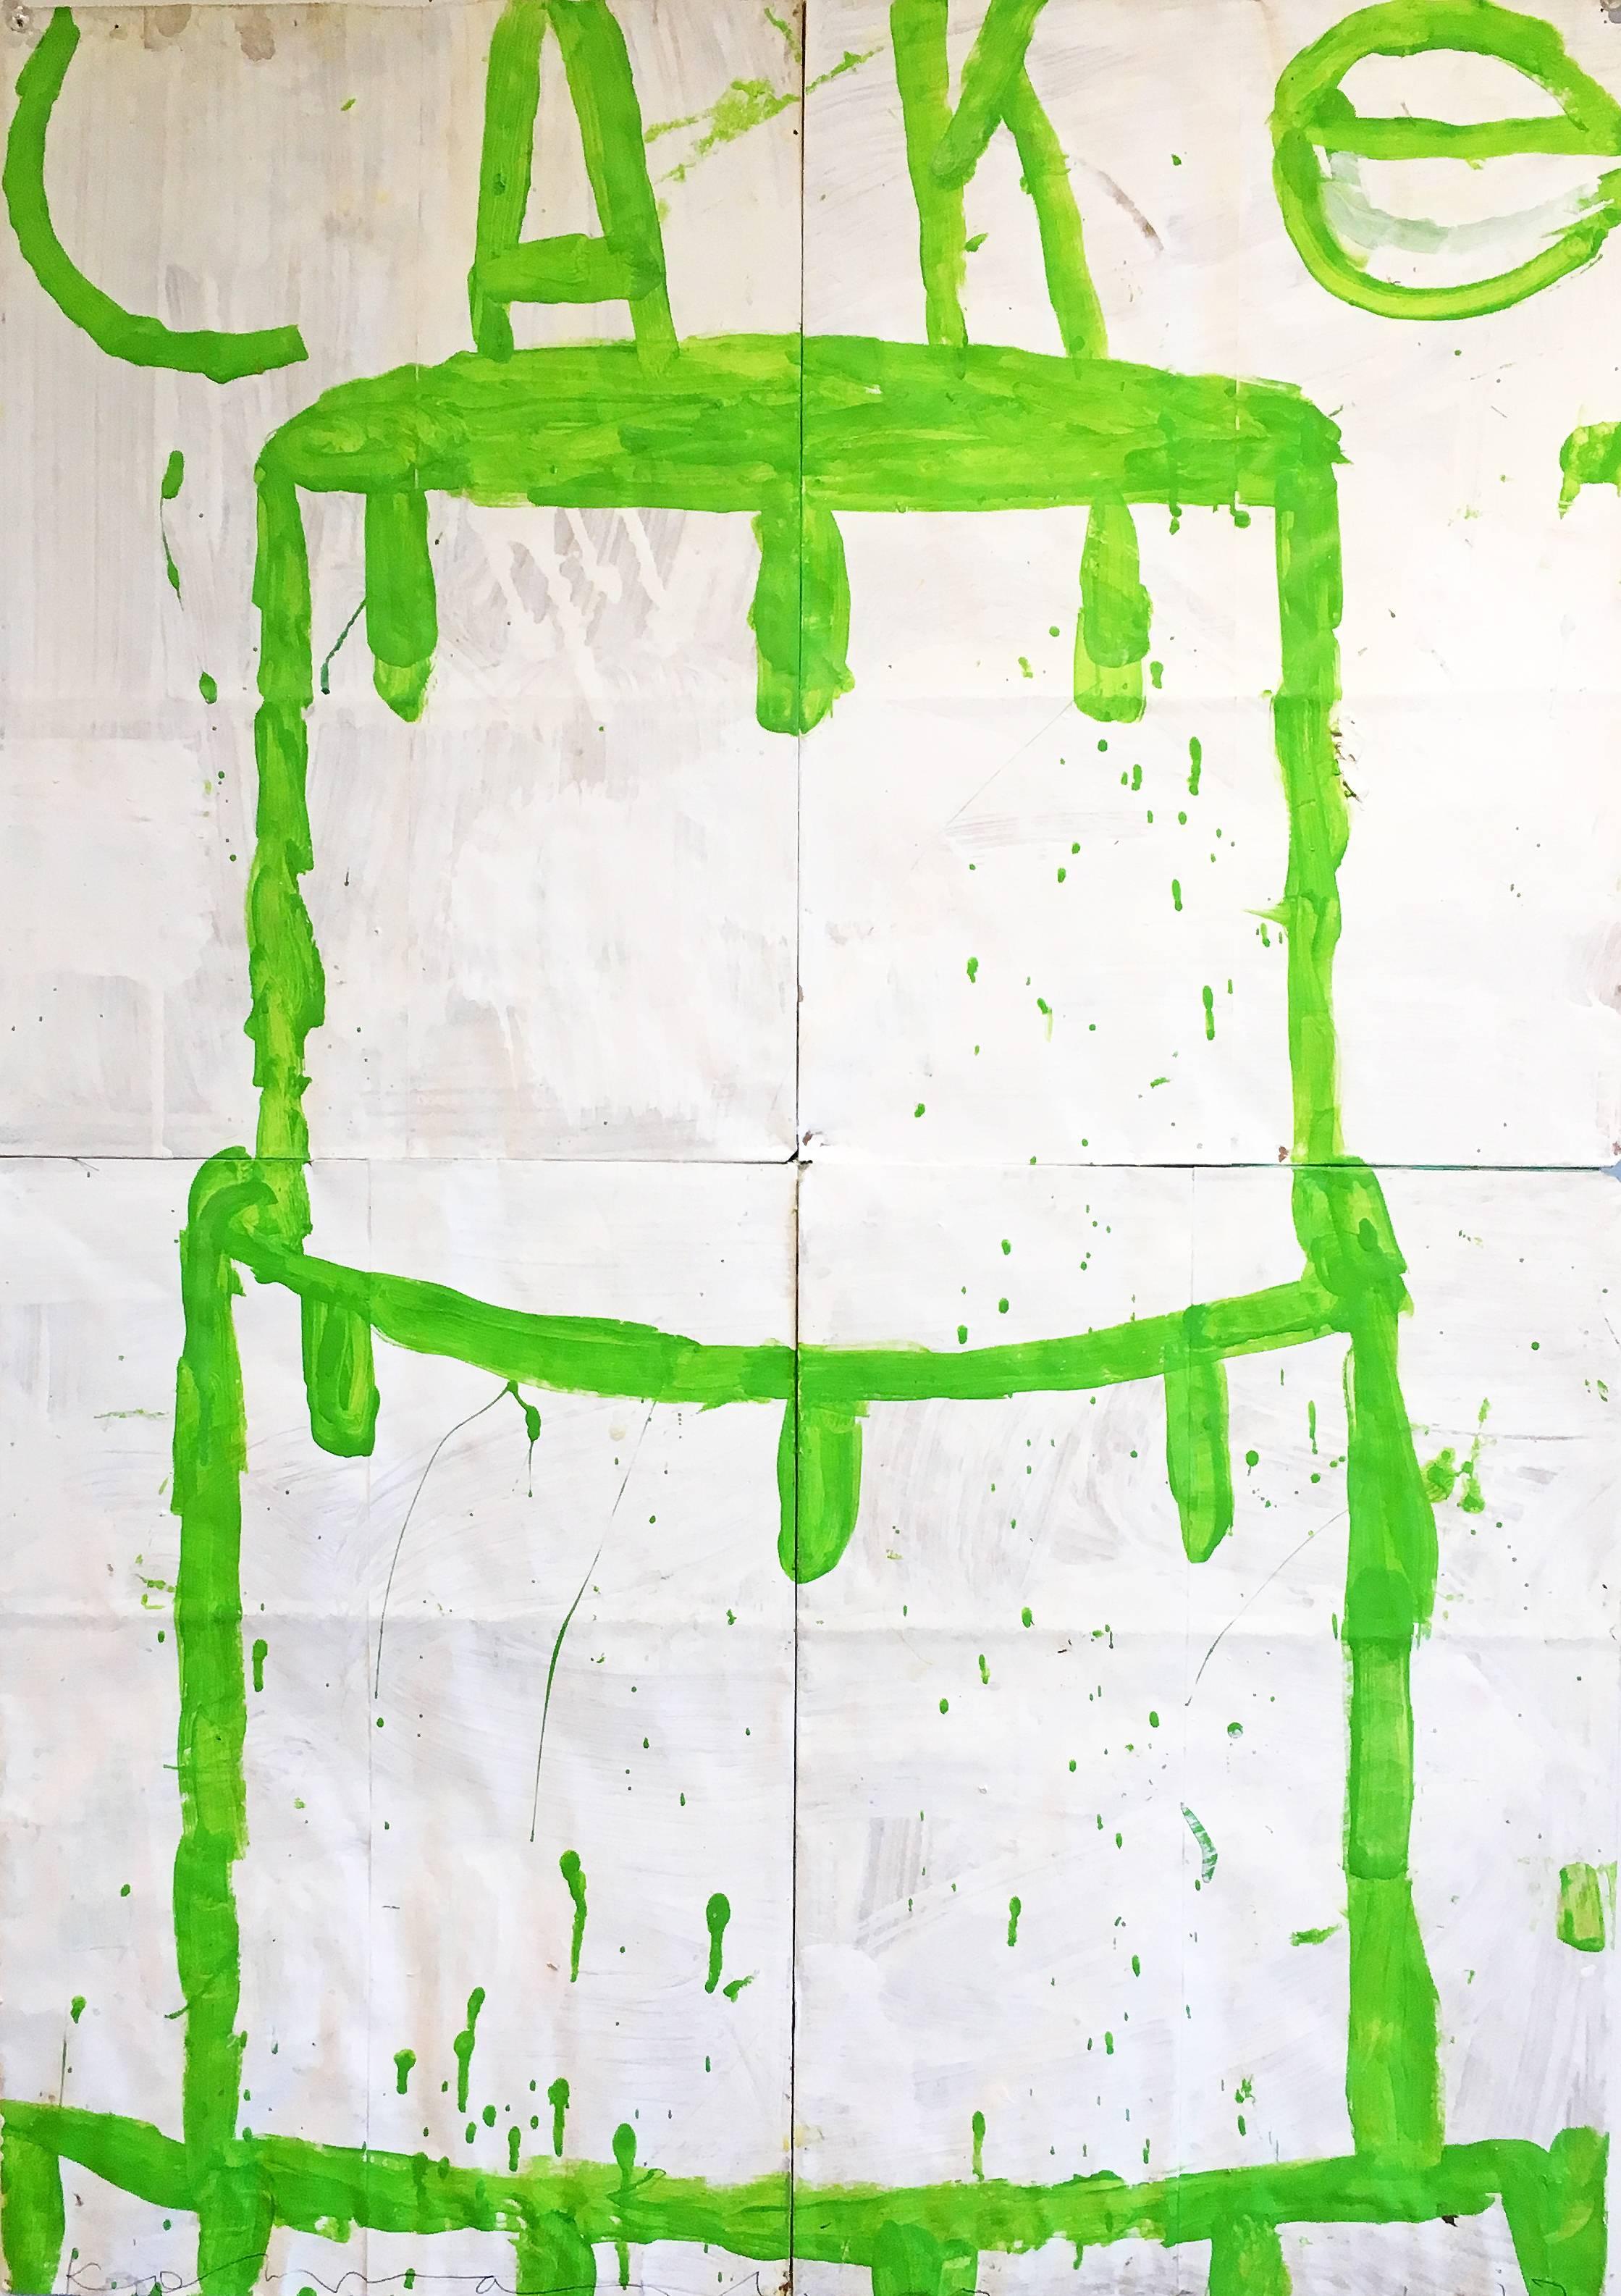 'Cake (Lime on White)' by contemporary artist, Gary Komarin, 2017. Acrylic on paper bags, 34 x 23.75 inches. This faux naive style painting of a 2-tier cake is outlined in a neon green on a white background. This artwork is floated in a white